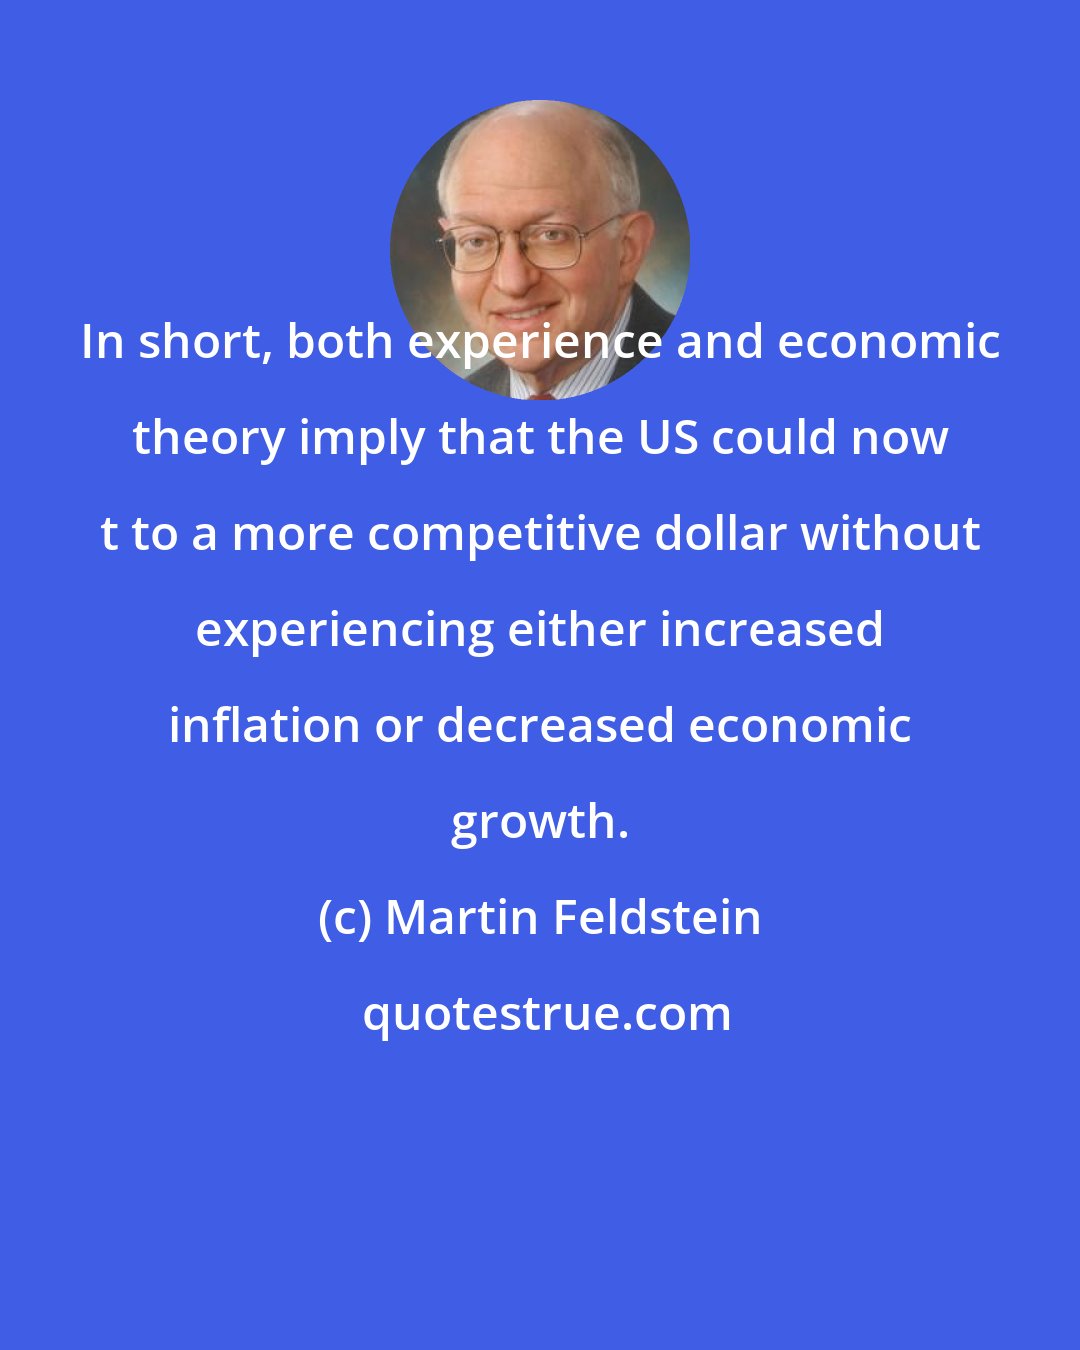 Martin Feldstein: In short, both experience and economic theory imply that the US could now t to a more competitive dollar without experiencing either increased inflation or decreased economic growth.